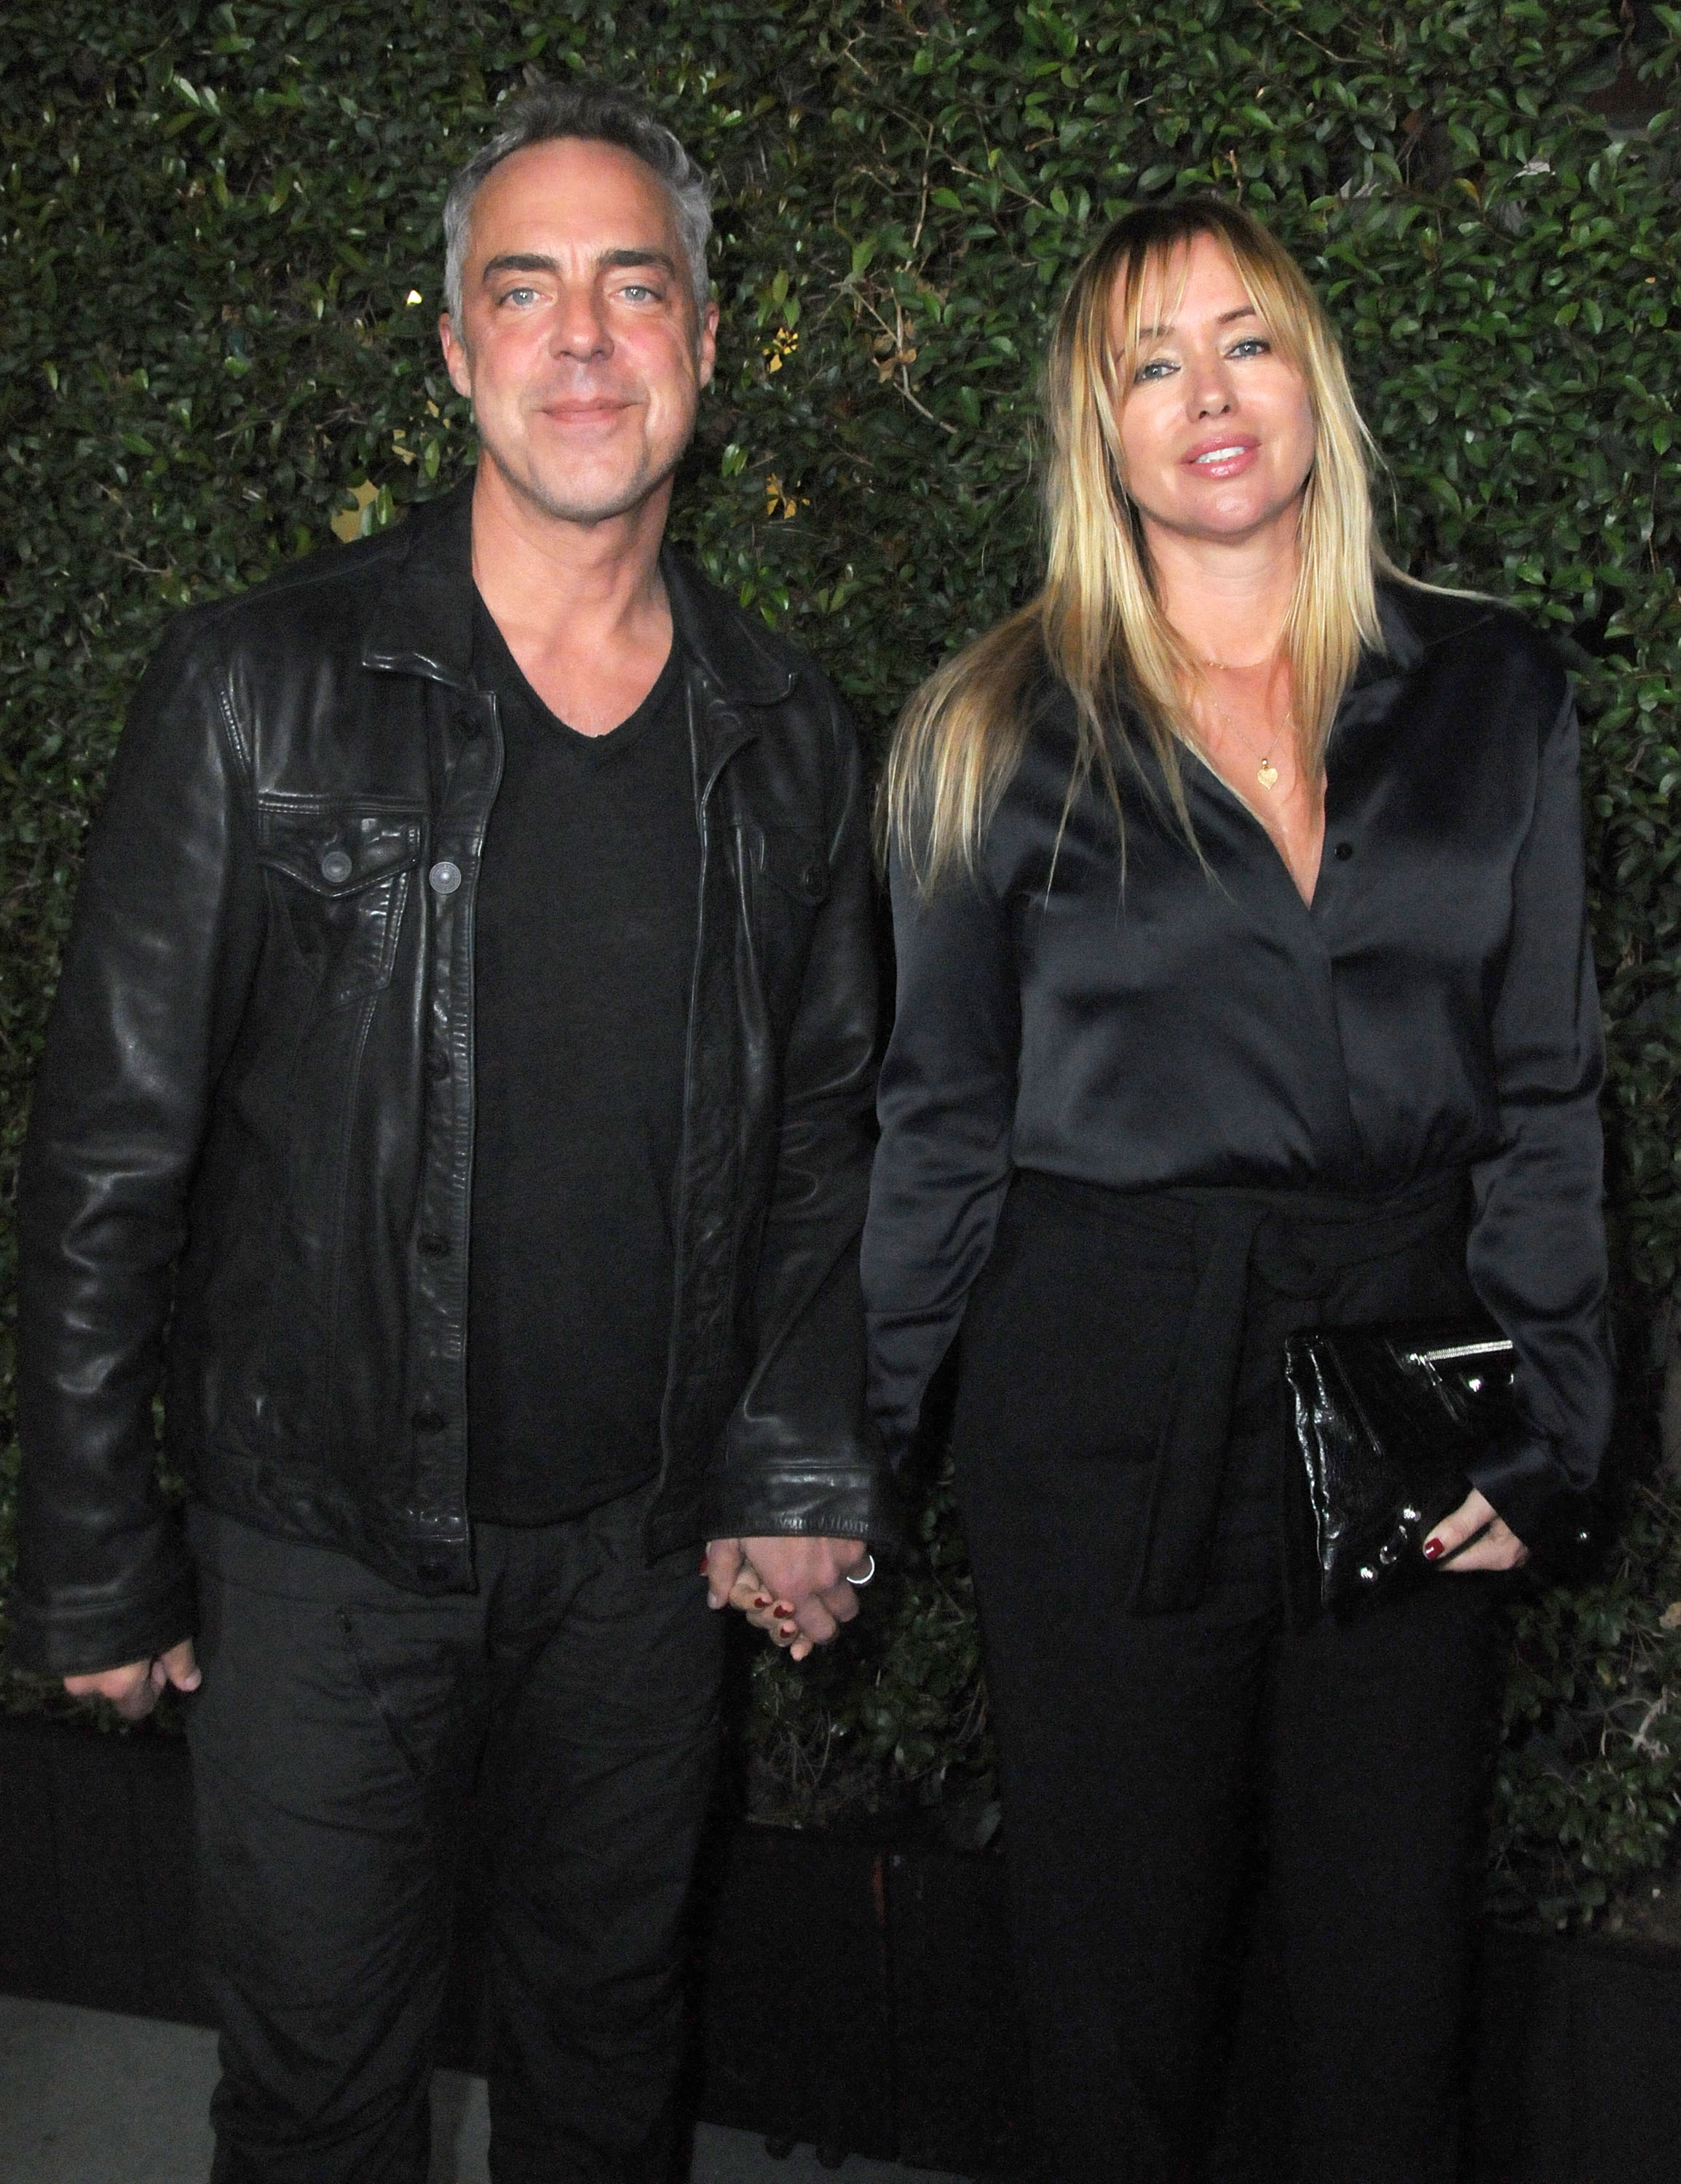 Actor Titus Welliver and wife Jose Welliver (aka Jose Stemkens) arrive at screening of "Bosch" at The Dome at Arclight Hollywood on February 3, 2015, in Hollywood, California. | Source: Getty Images